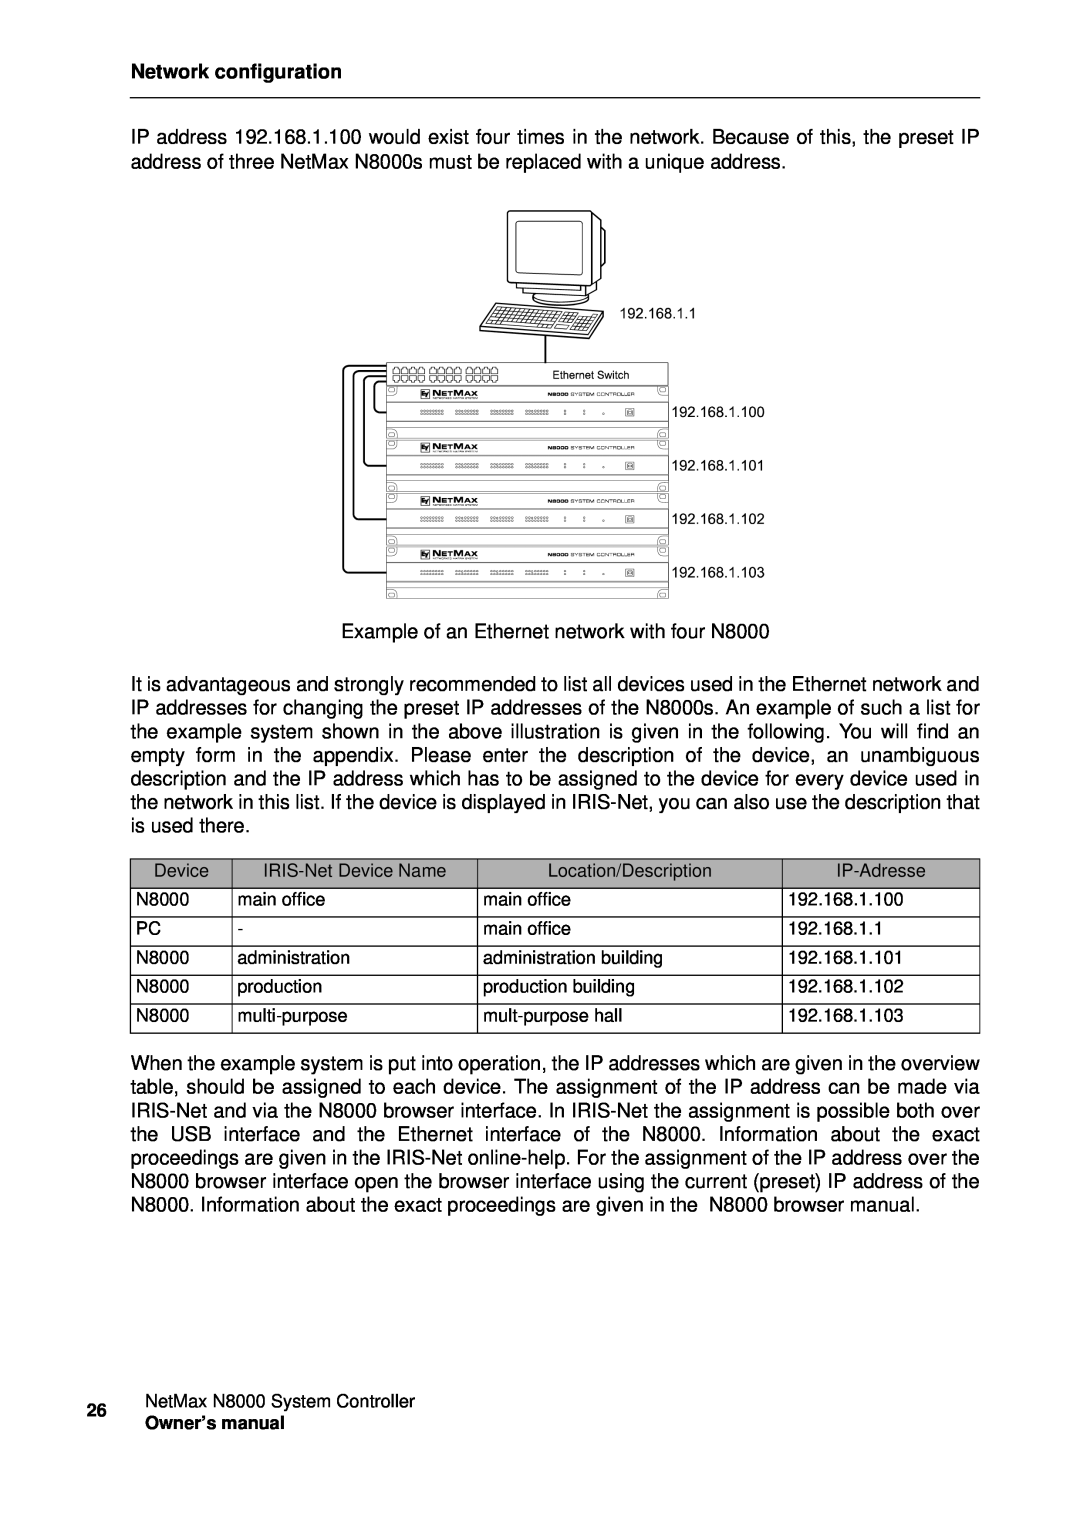 Electro-Voice NetMax N8000 owner manual Network configuration, Example of an Ethernet network with four N8000 